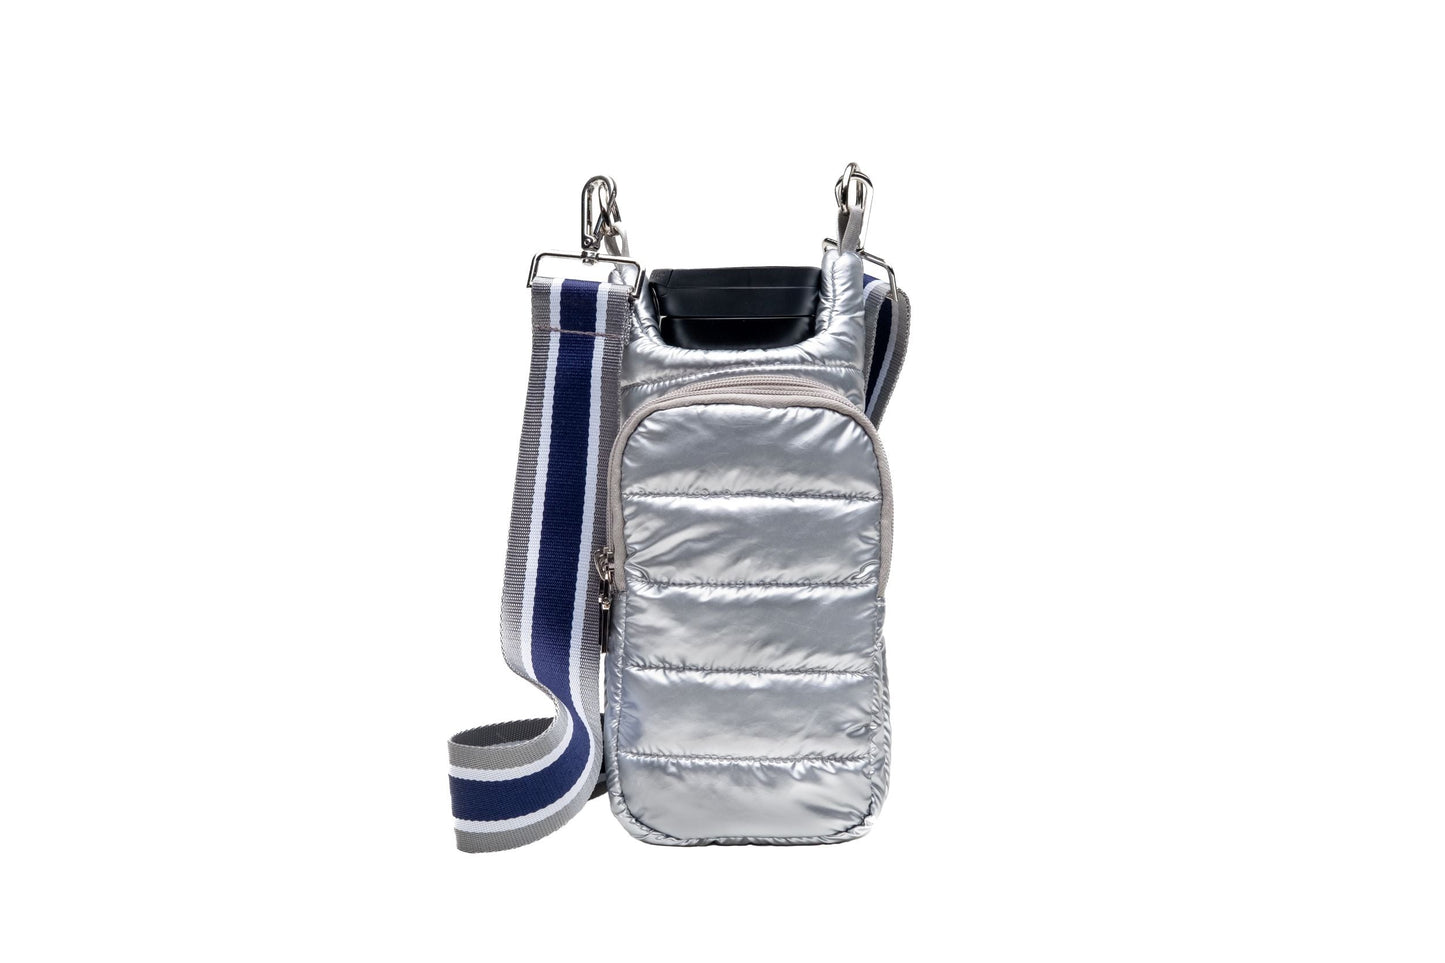 Wholesale - Silver Shiny HydroBag with Navy/Gray Strap